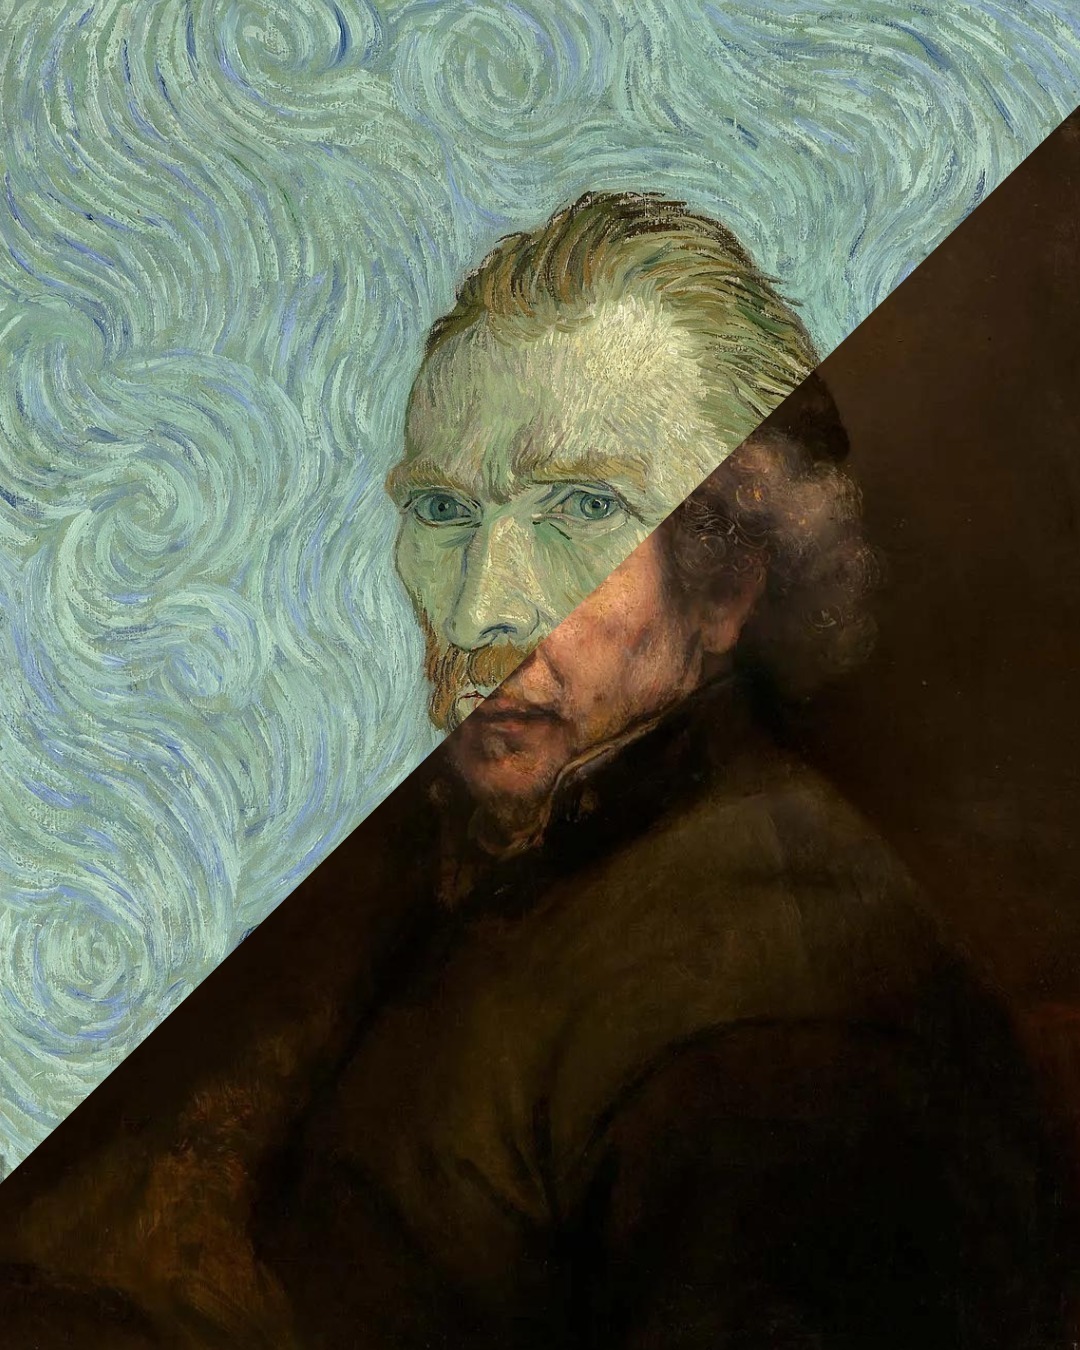 When you can't decide which artistic genius to choose between Vincent van Gogh and Rembrandt van Rijn... Why not experience both? 😄

#vangoghrembrandtamsterdam #amsterdamhotspot #amsterdamtodo #amsterdambucketlist #amsterdammuseum